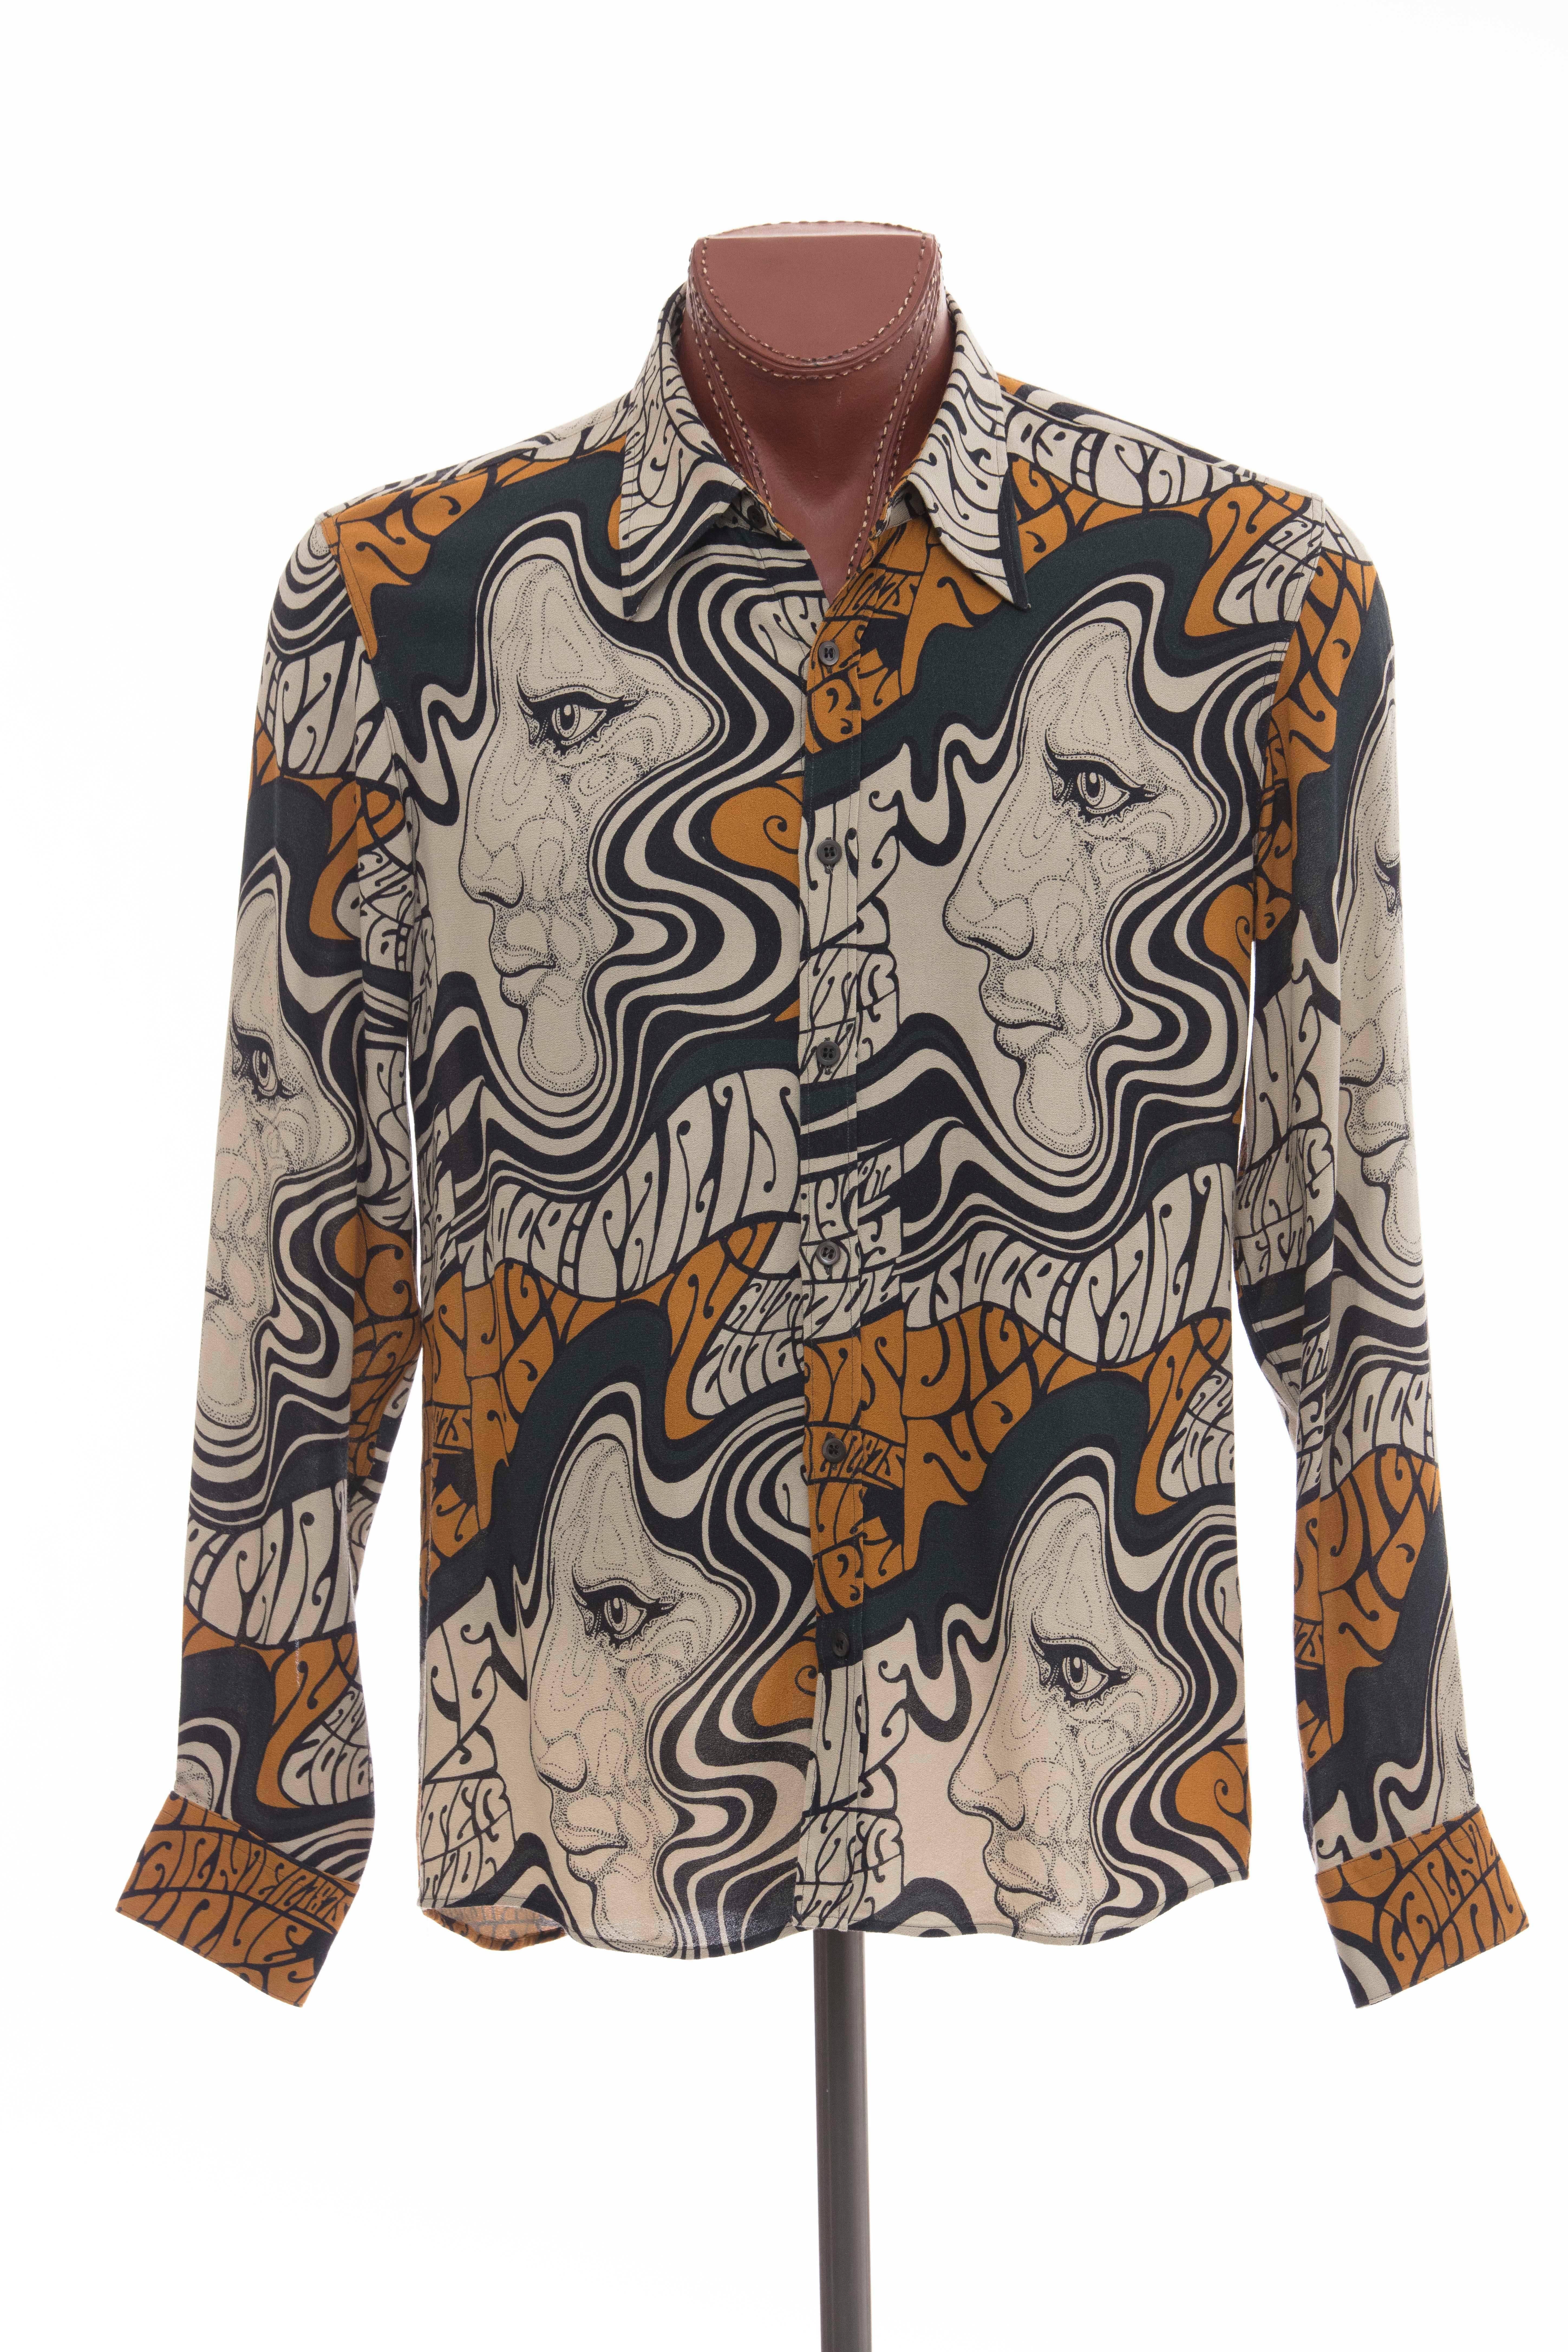 Dries Van Noten, Autumn-Winter 2016 print woven shirt with spread collar, one-button cuffs at long sleeves and button closures at front.

IT. 54
US. 44

Chest 42", Length 27", Sleeve 35"
